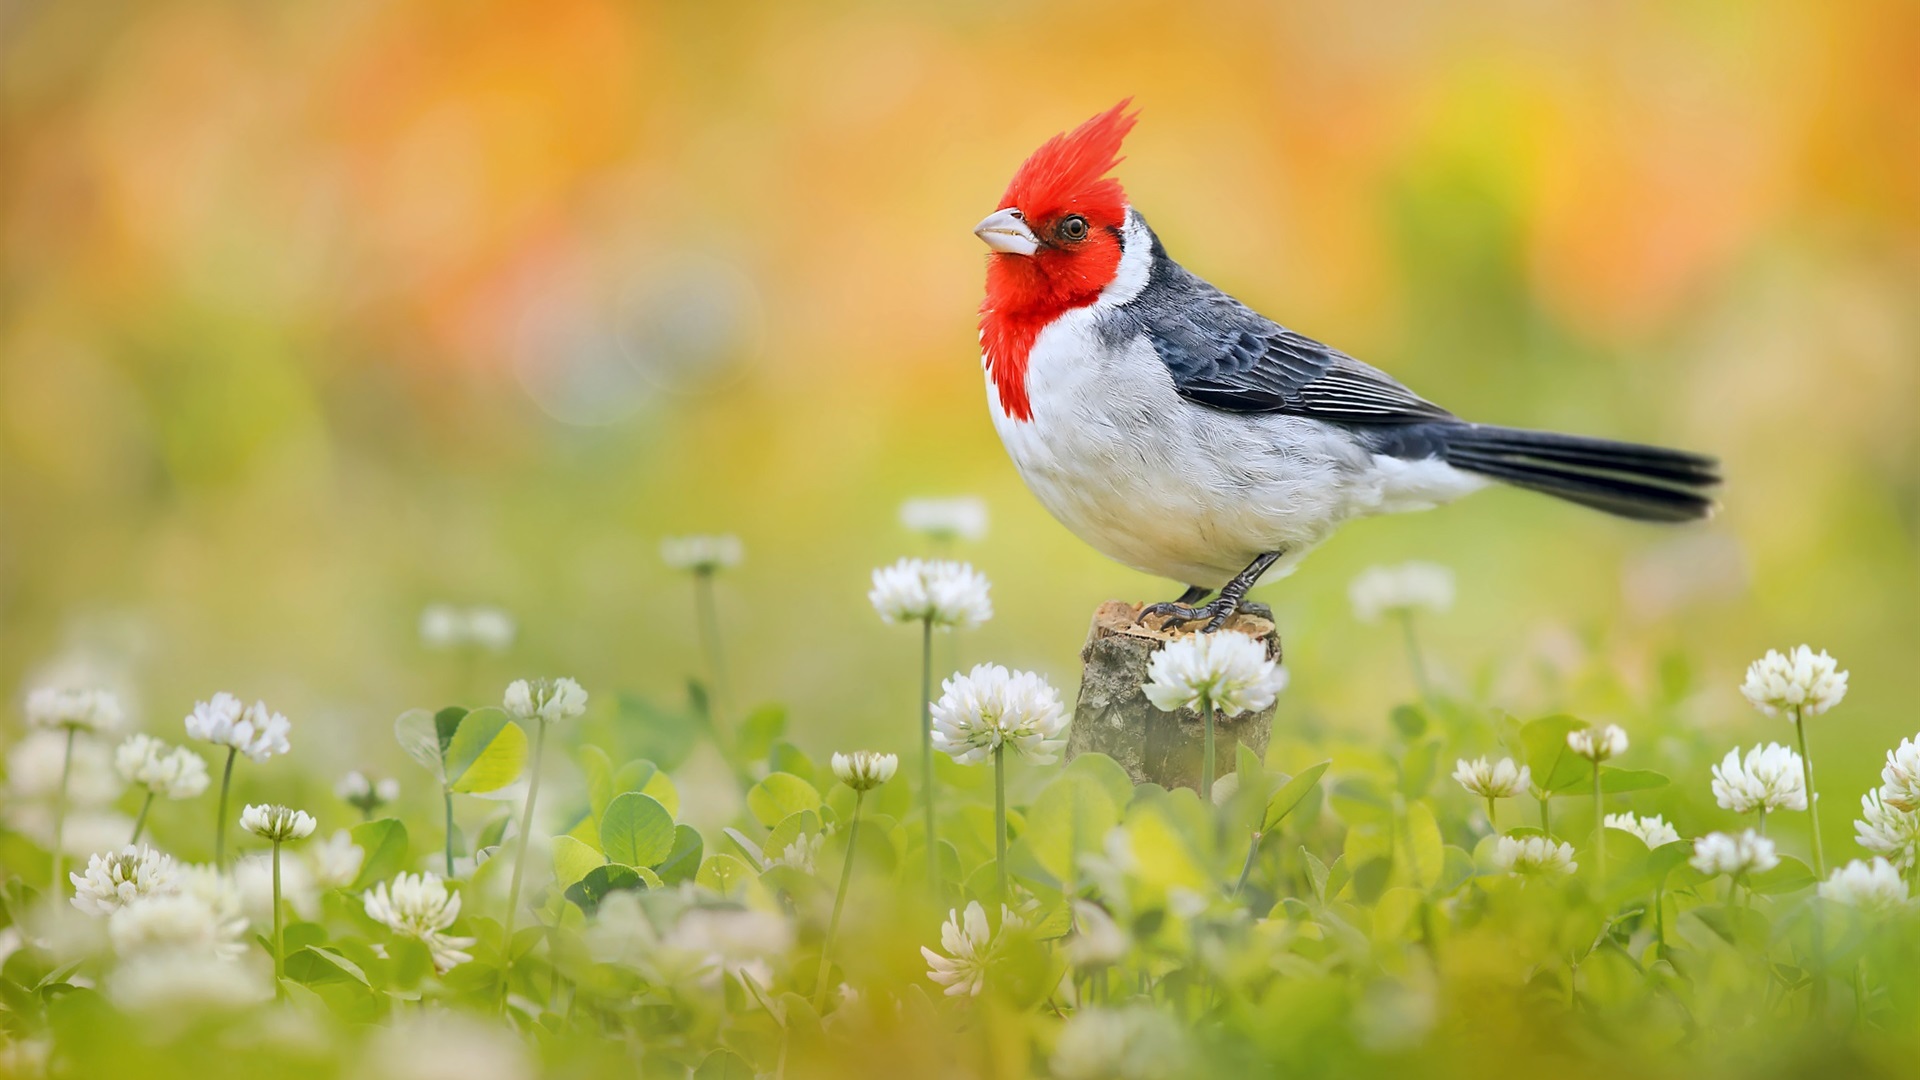 General 1920x1080 birds animals nature plants colorful flowers